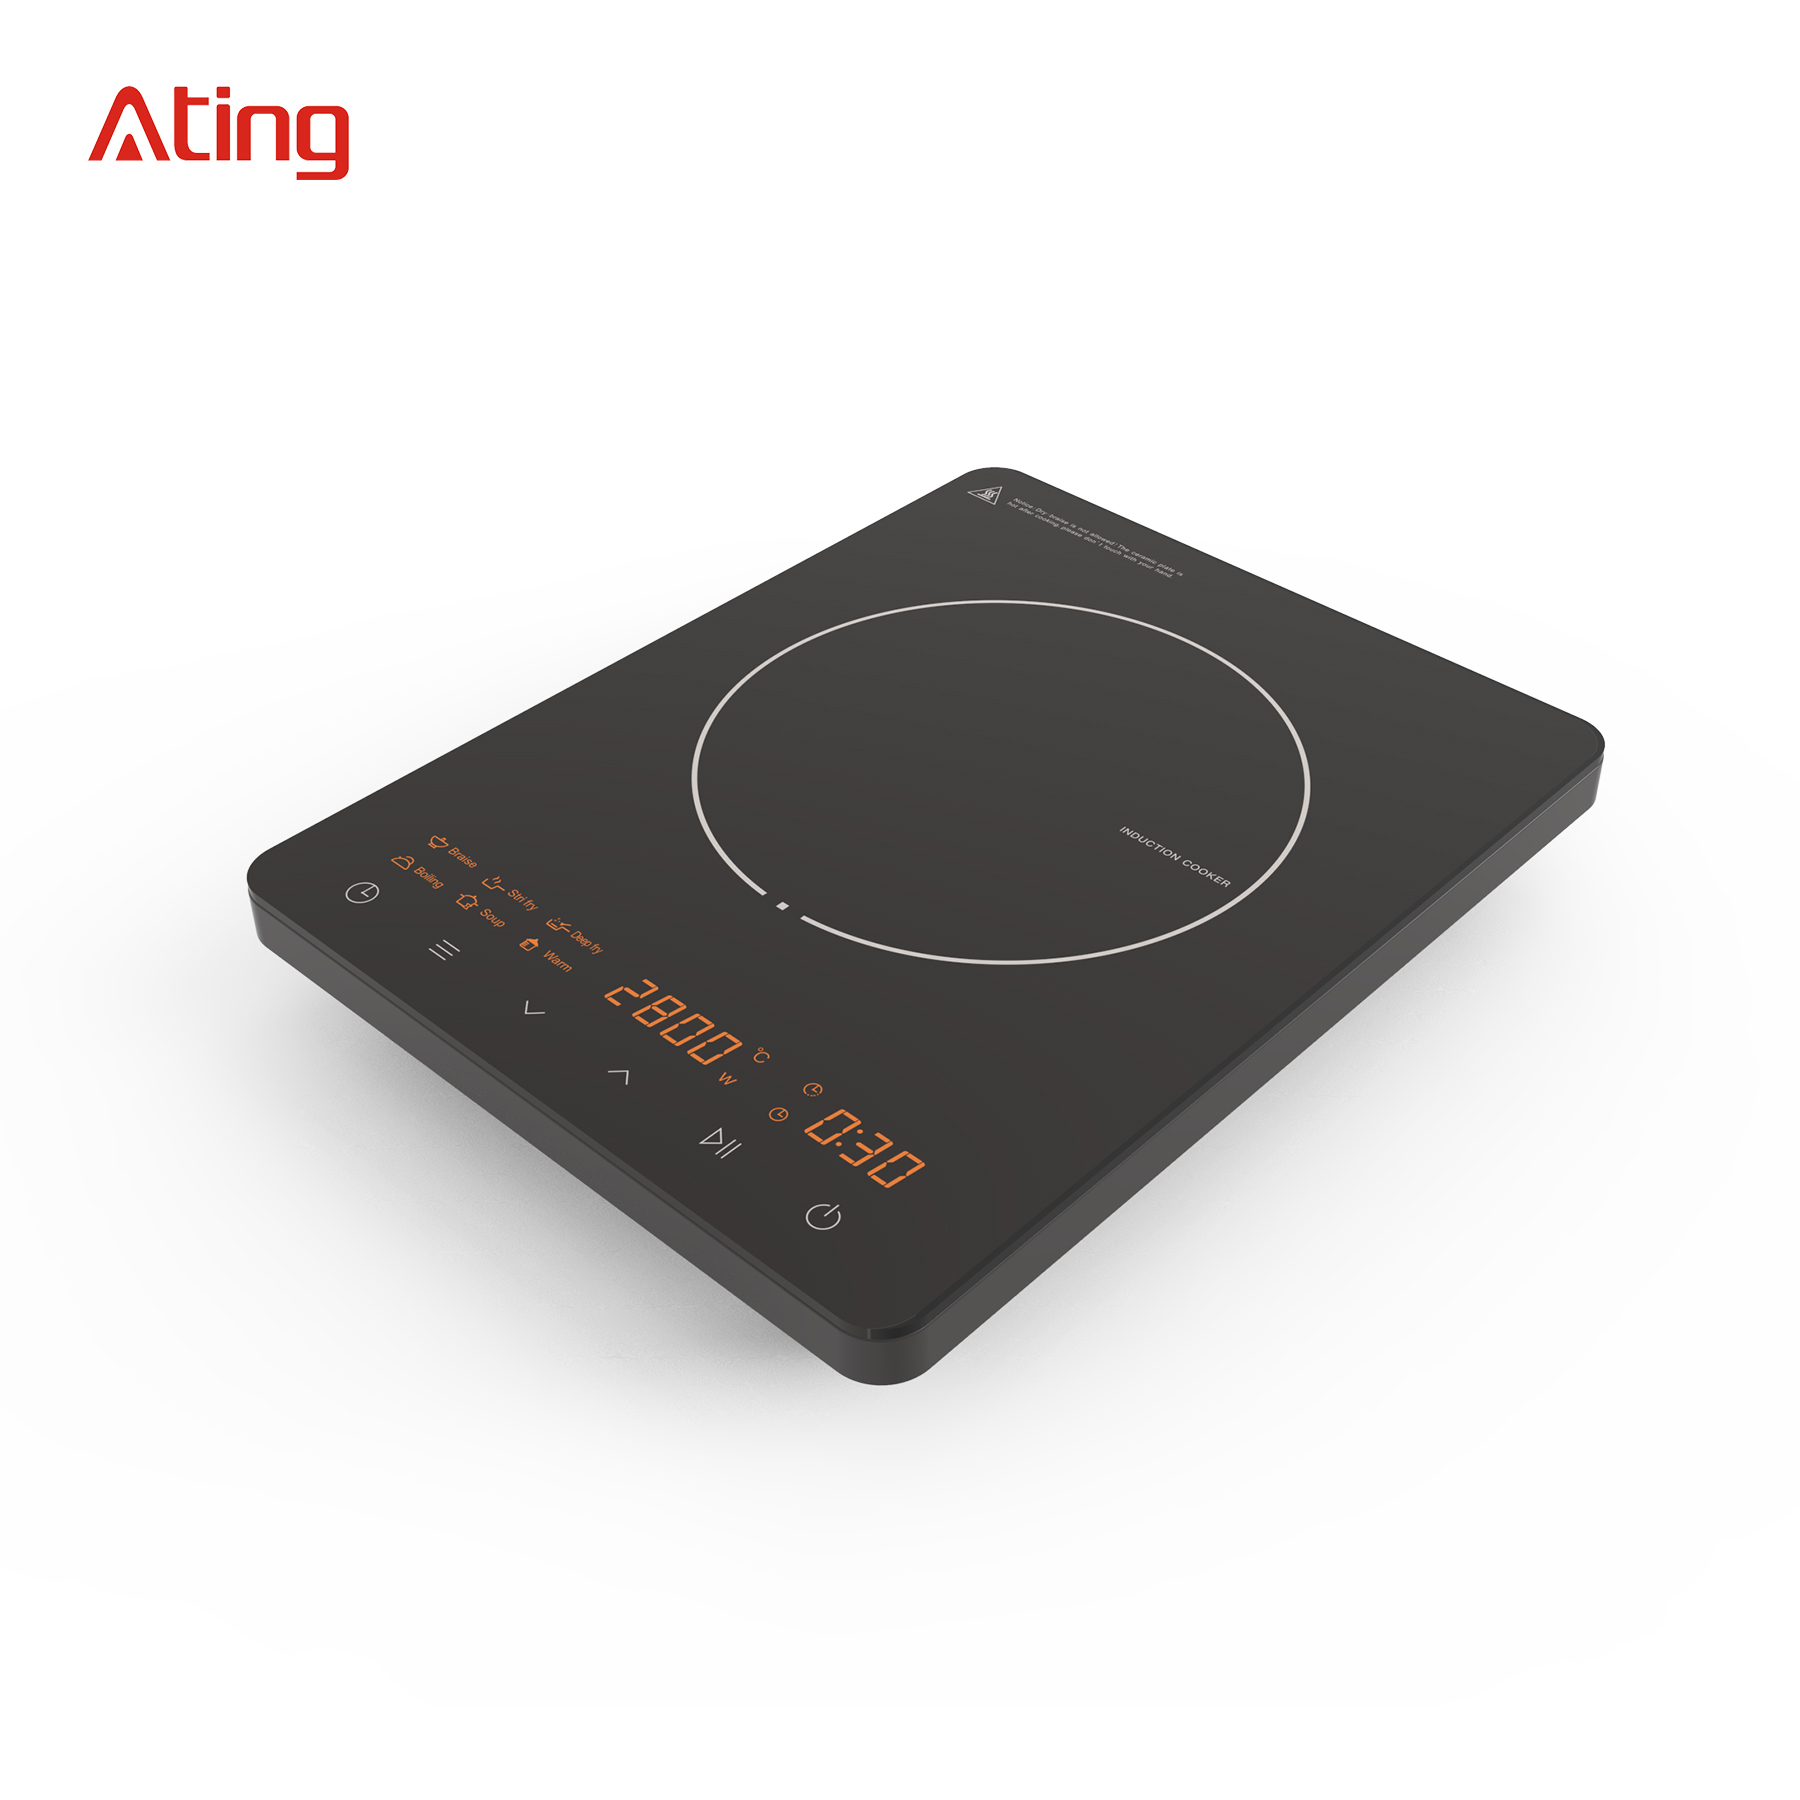 IH-T28-A, 2800W big power induction cooker, touch control induction hob